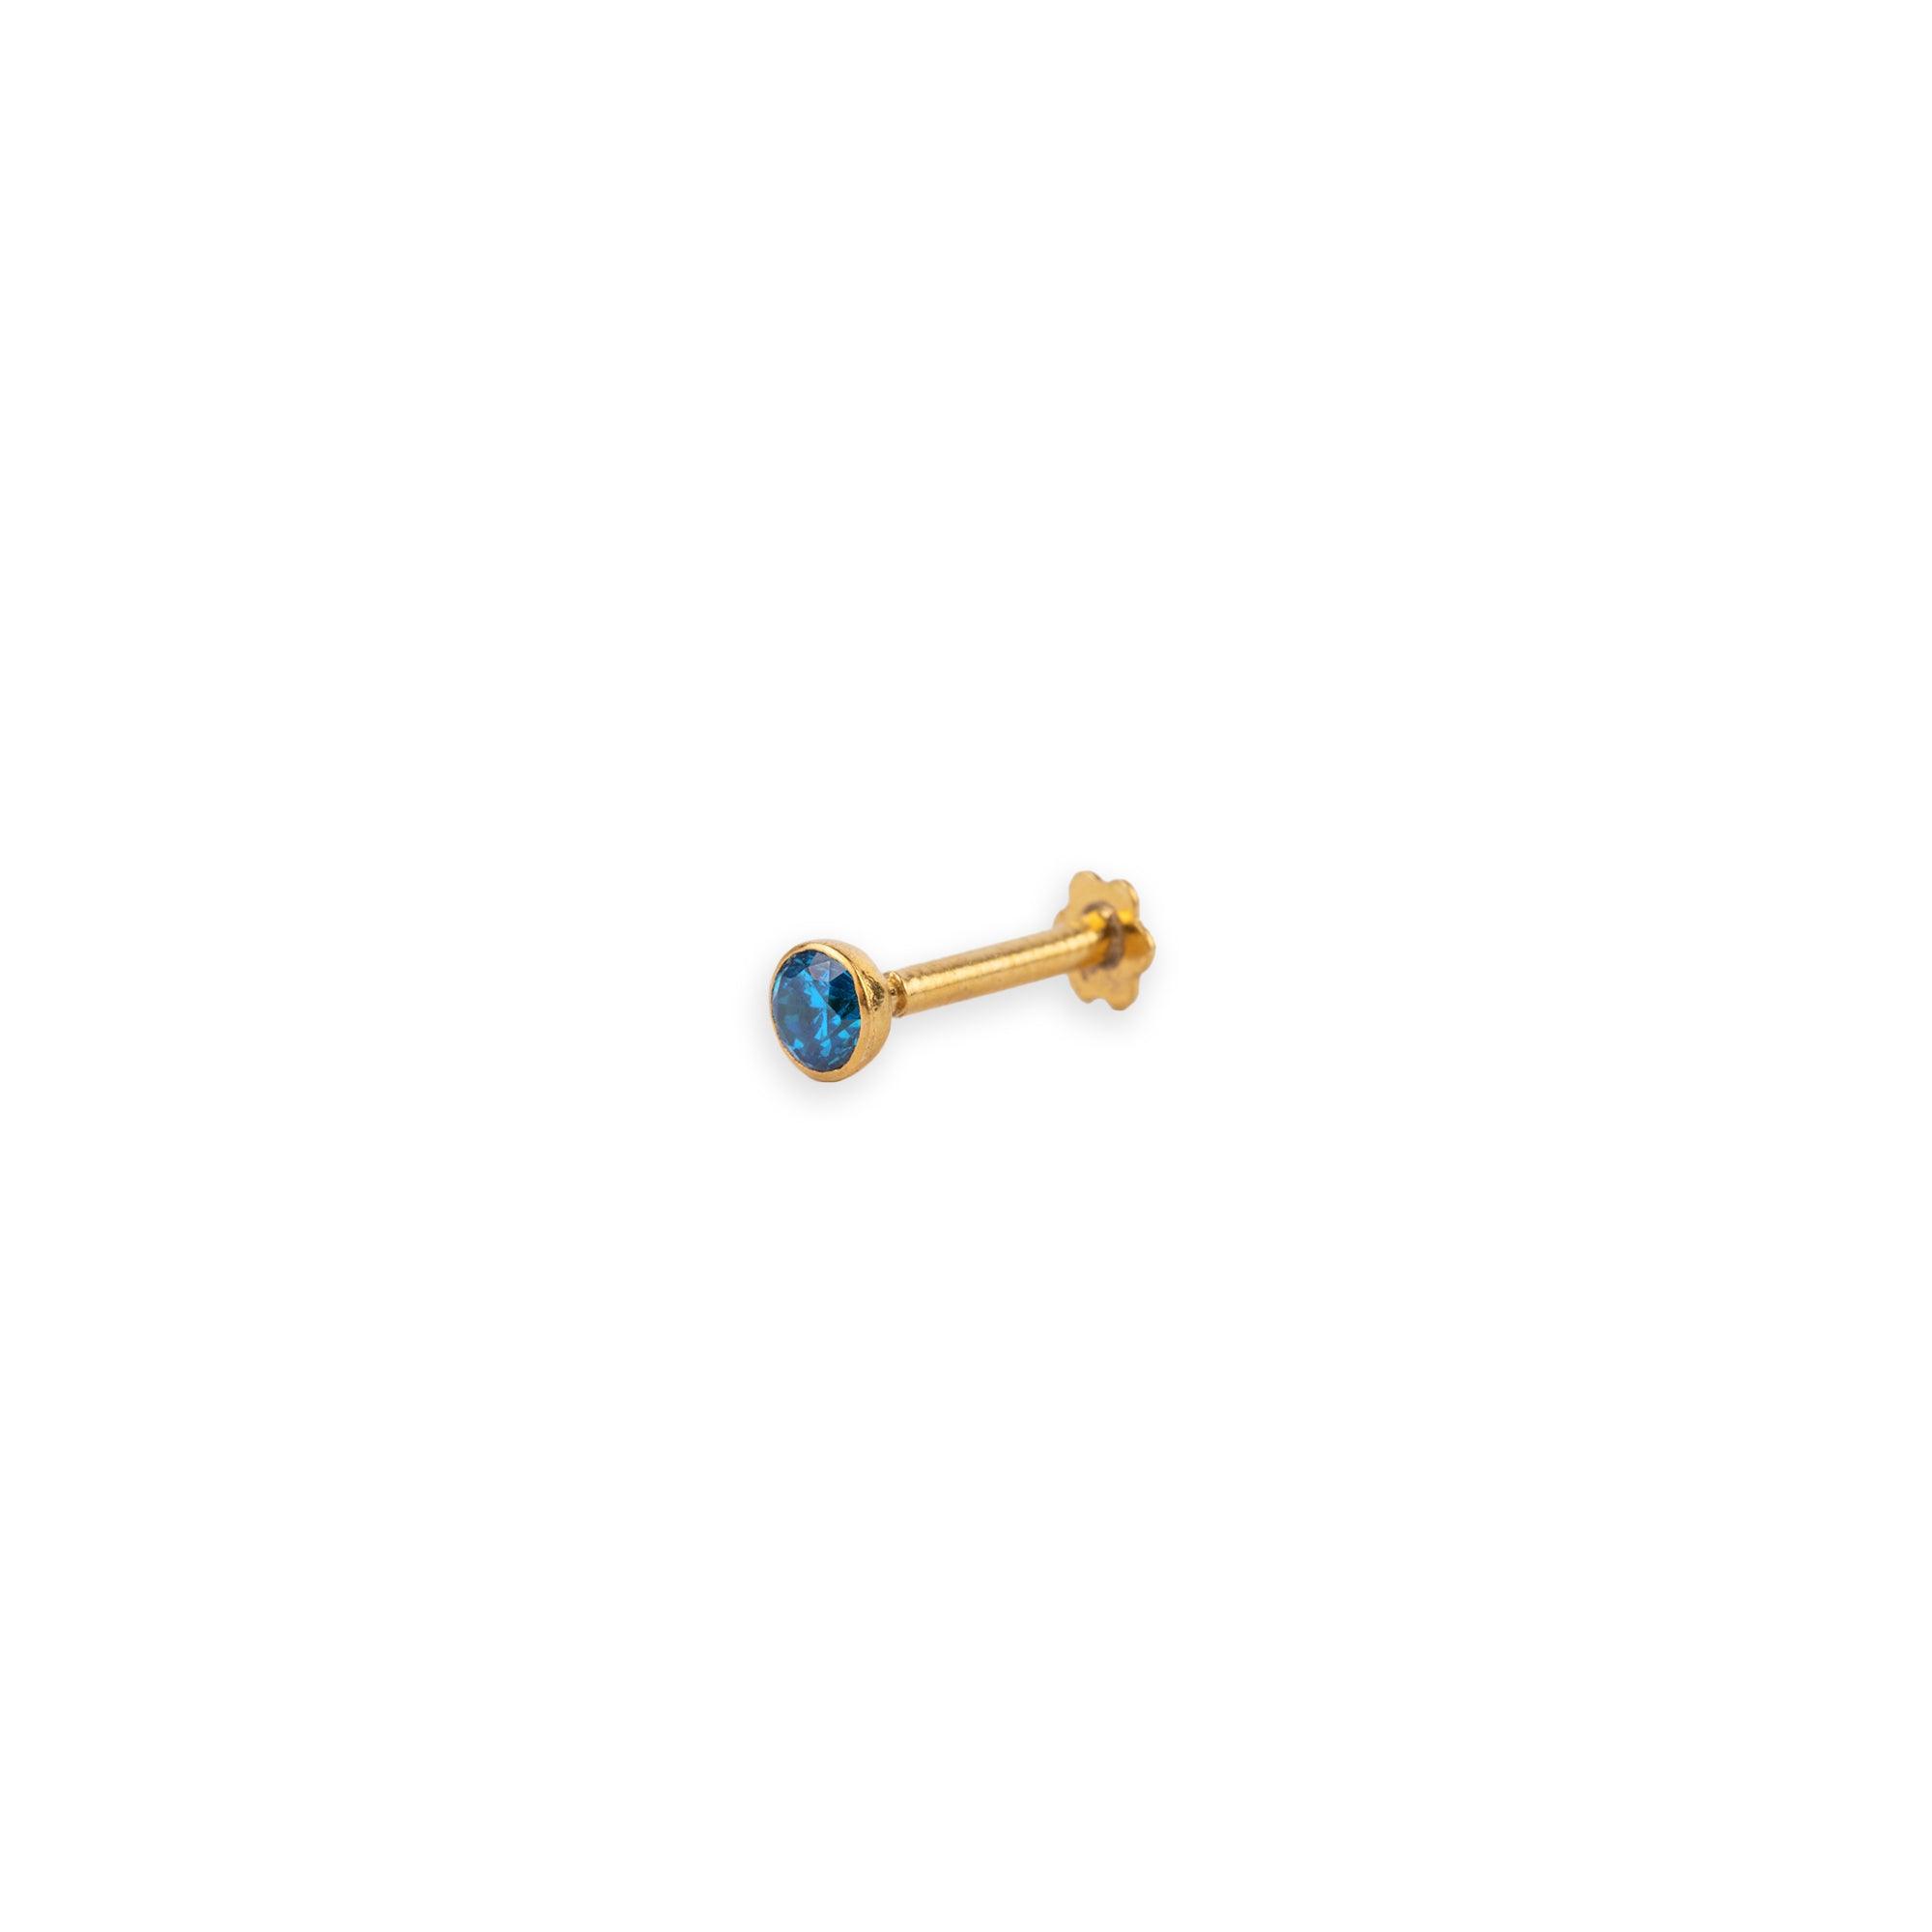 18ct Yellow Gold Screw Back Nose Stud with Cubic Zirconia in a Rub Over (Bezel) Setting NS-2880